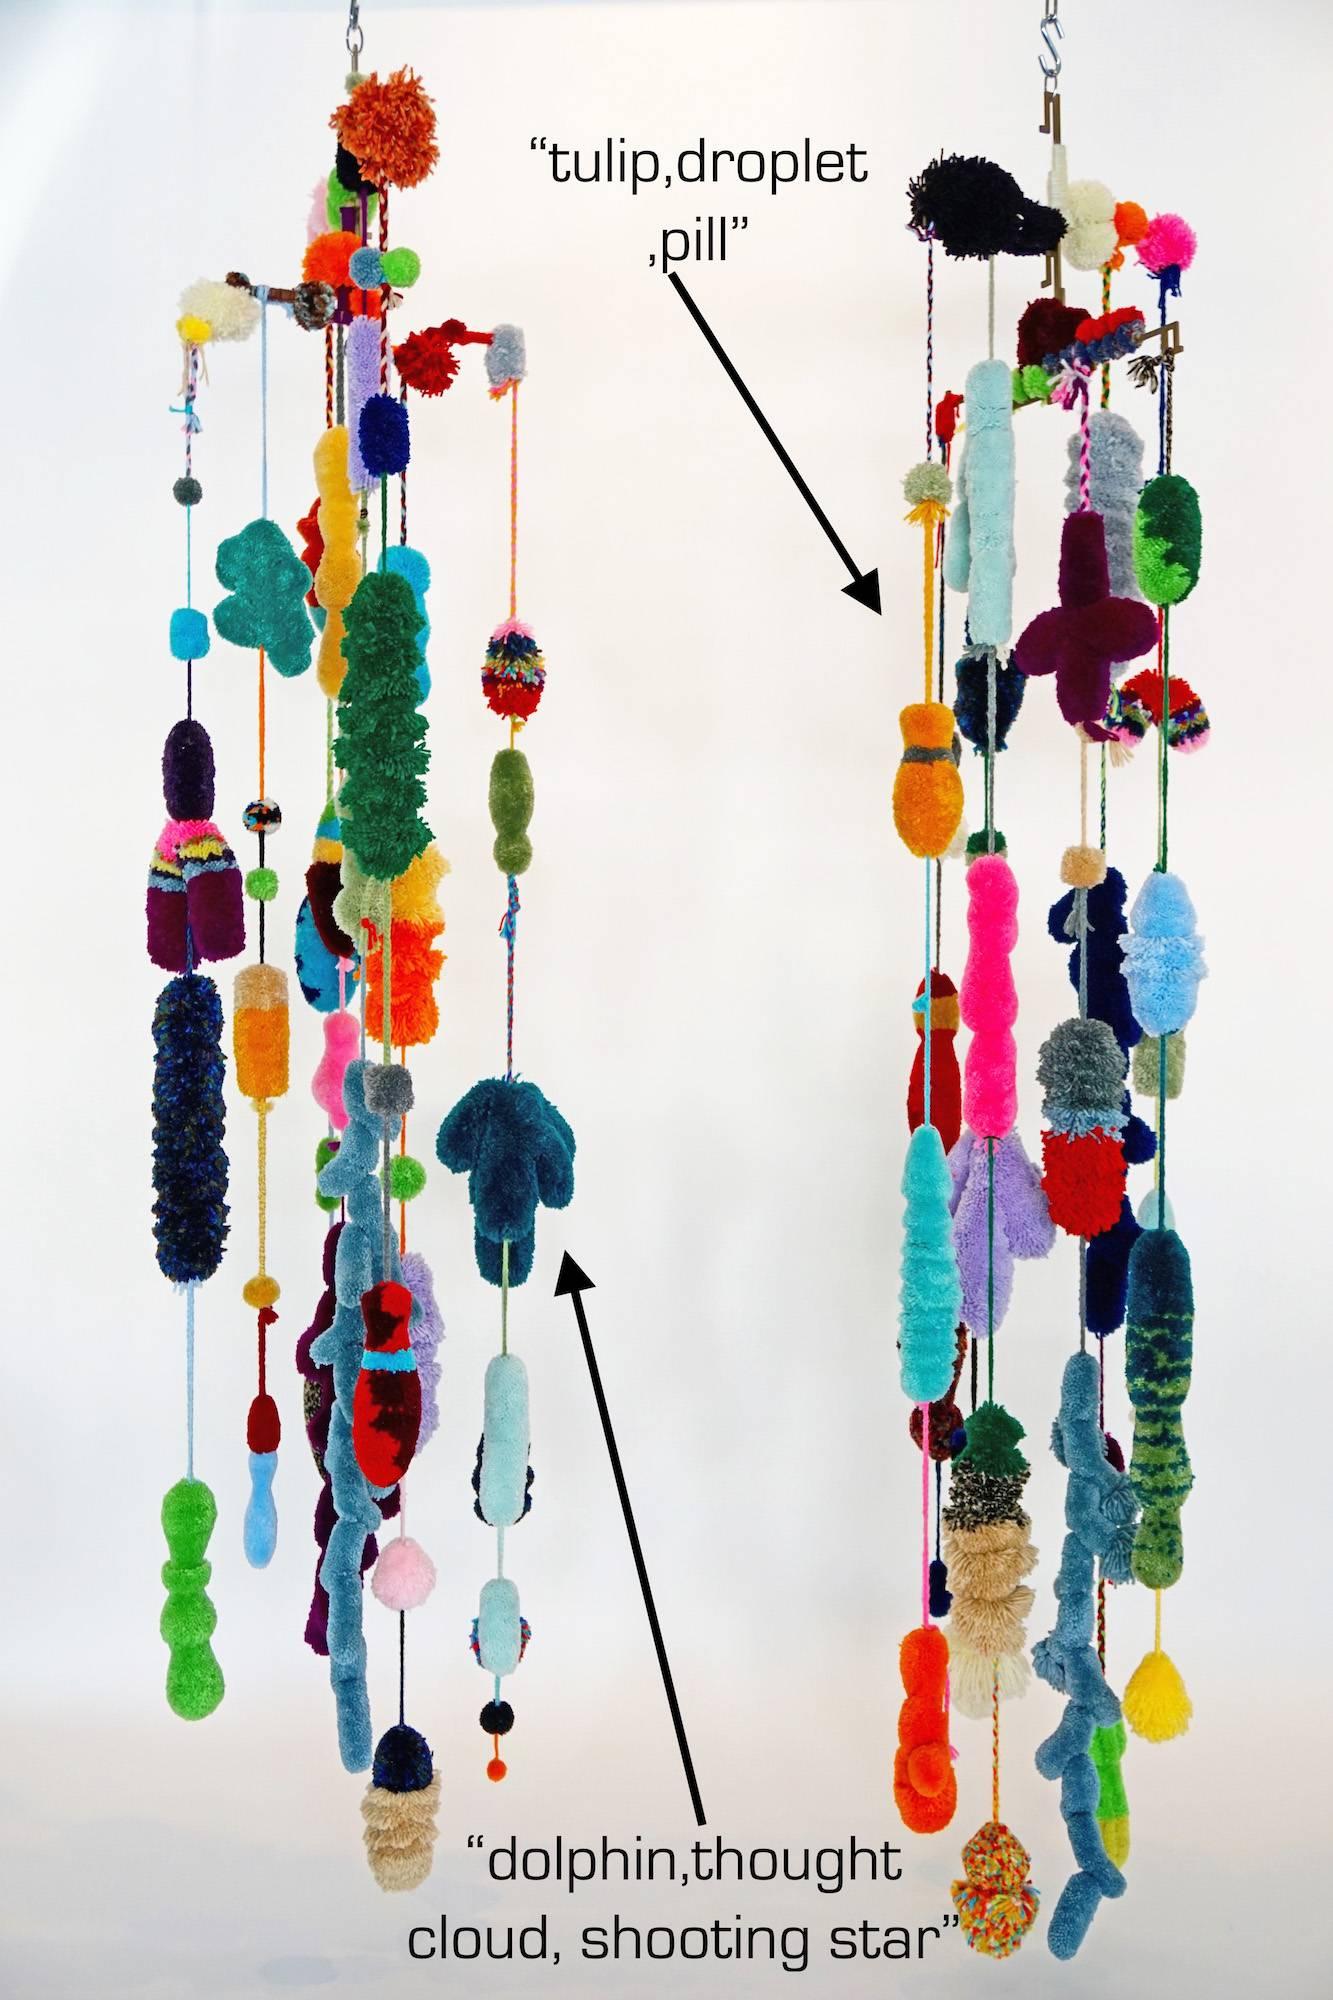 Strands of pom poms made with acrylic yarn and hand-cut profiles hung from water jet cut solid brass brackets by Mary Brogger.

Priced separately two available:
The one on the right is titled "tulip, droplet, pill."
The one on the left